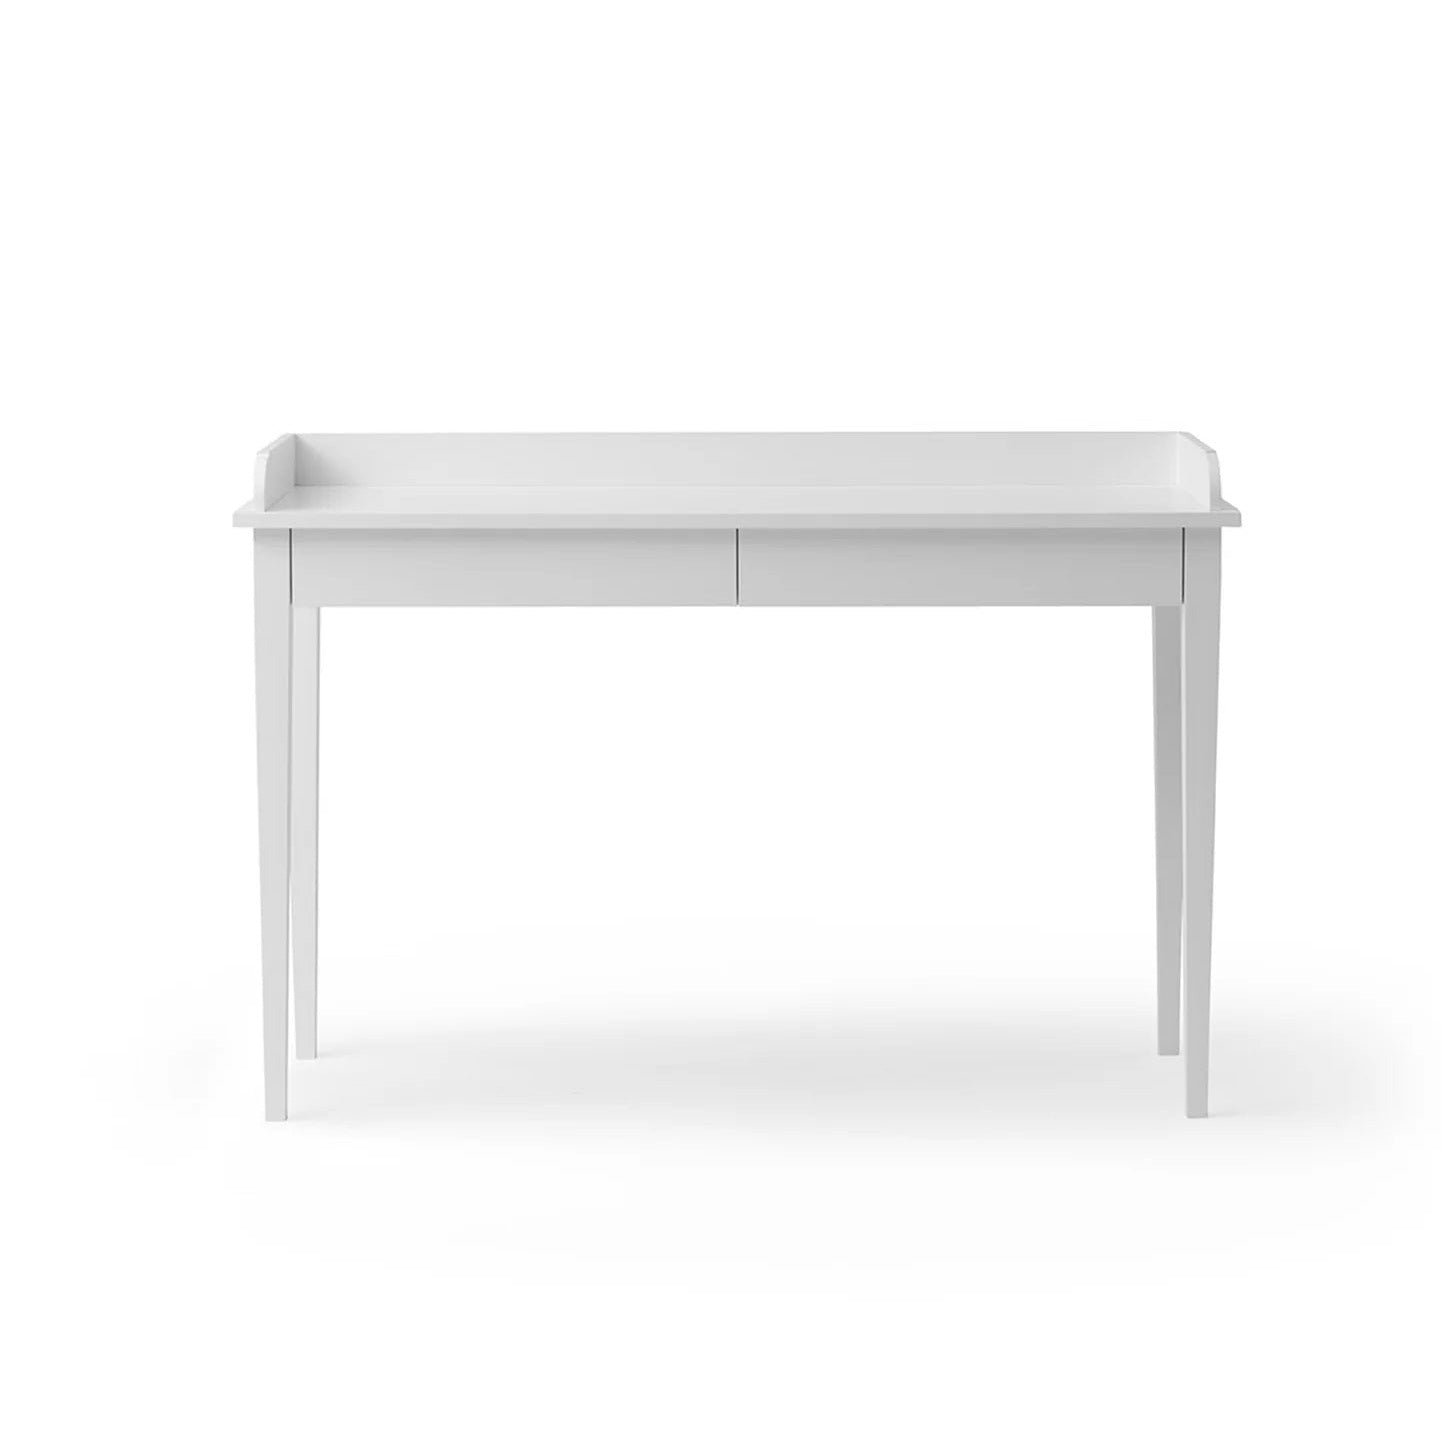 Oliver Furniture Seaside Console Table - White